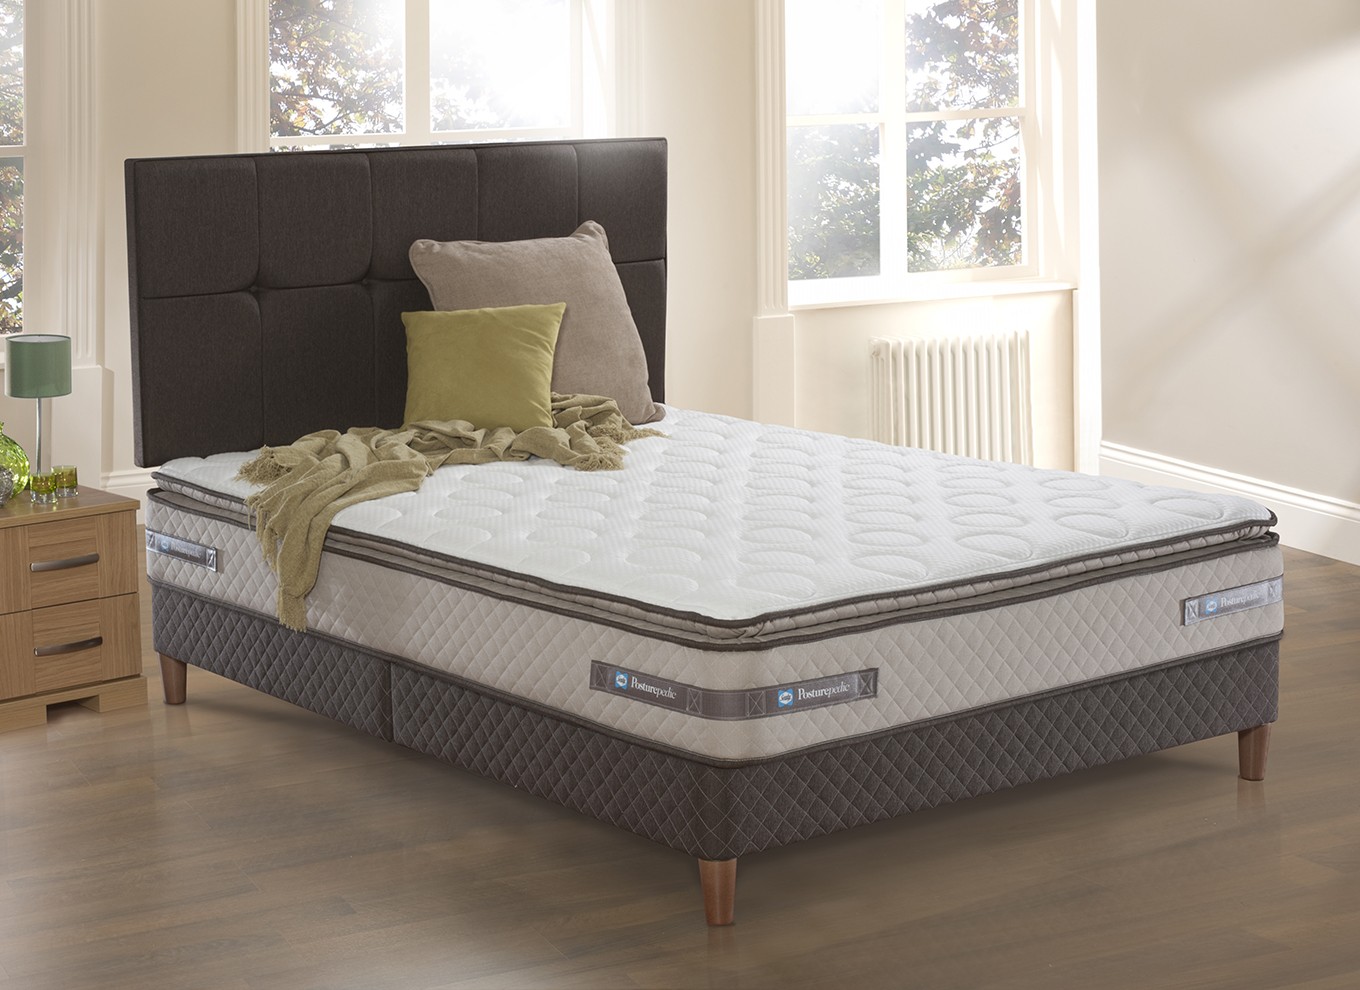 4`6 Double Sealy Columbus Posturetech Spring Divan Bed with